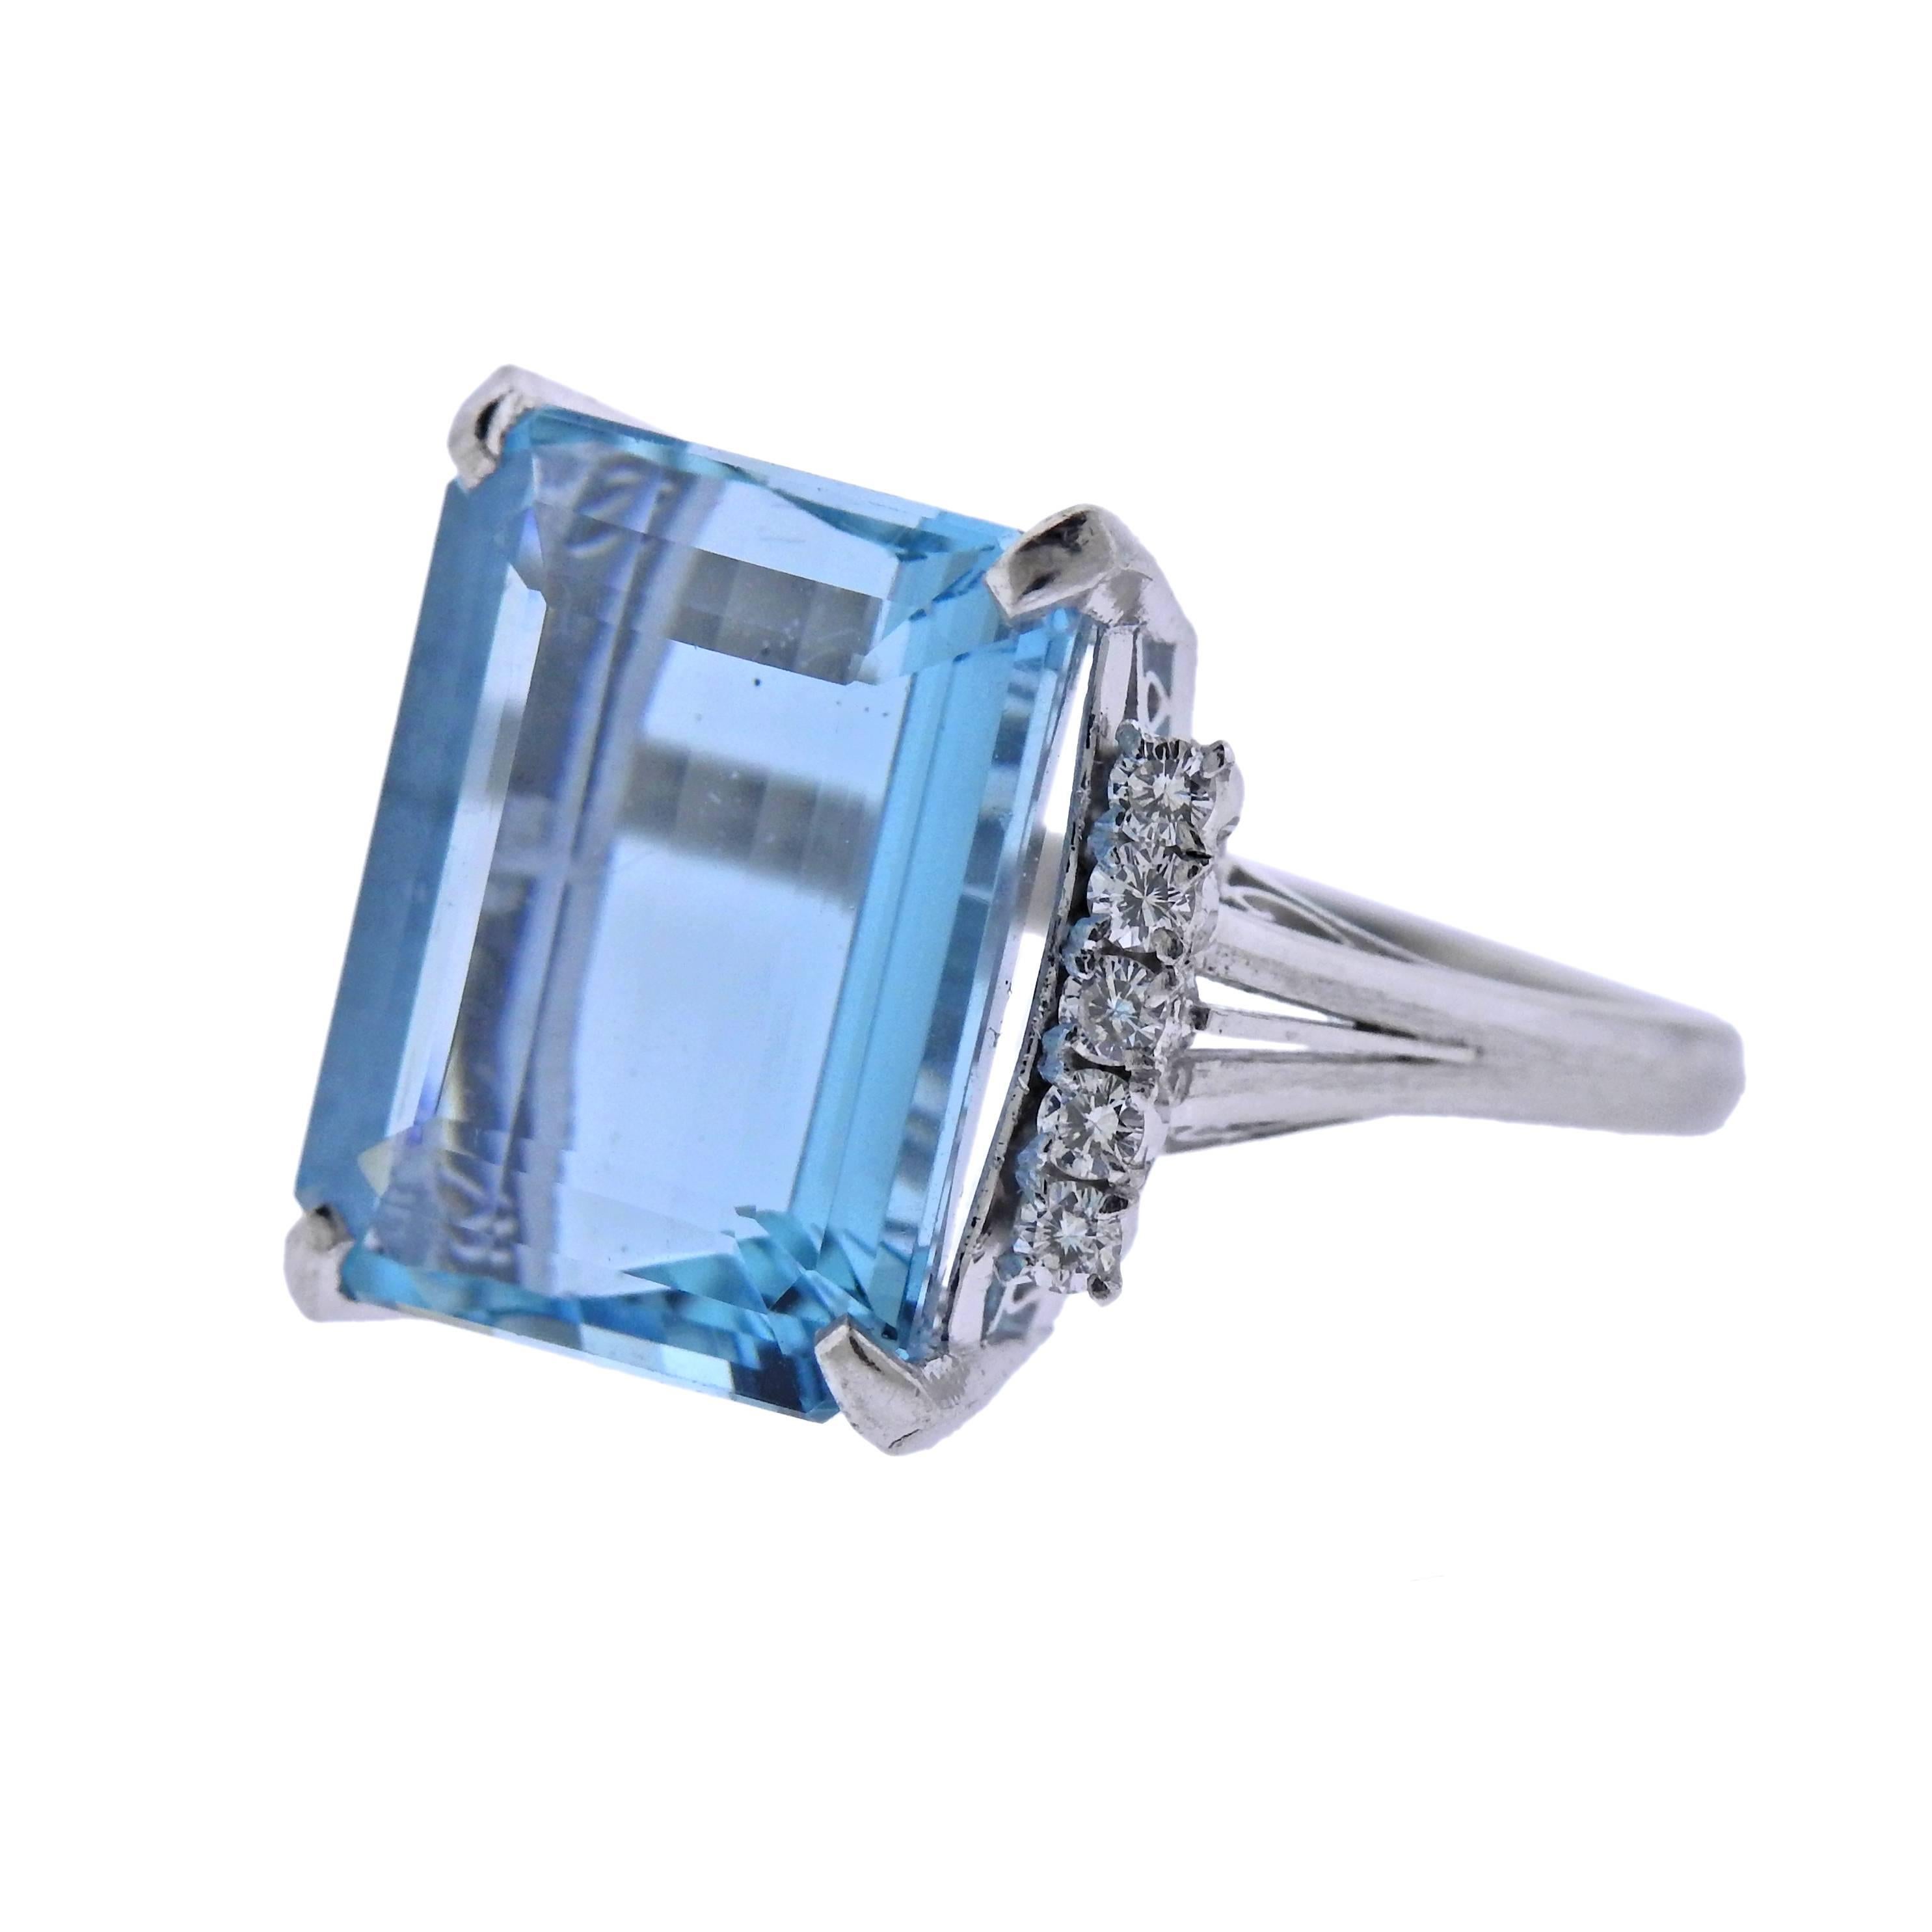  Classic platinum cocktail ring, featuring 16.07ct aquamarine, surrounded with 0.33ctw in diamonds. Ring size - 8, ring top - 16.8mm x 16.7mm, weighs 11.3 grams. Marked: Pt900, A1607, 033.